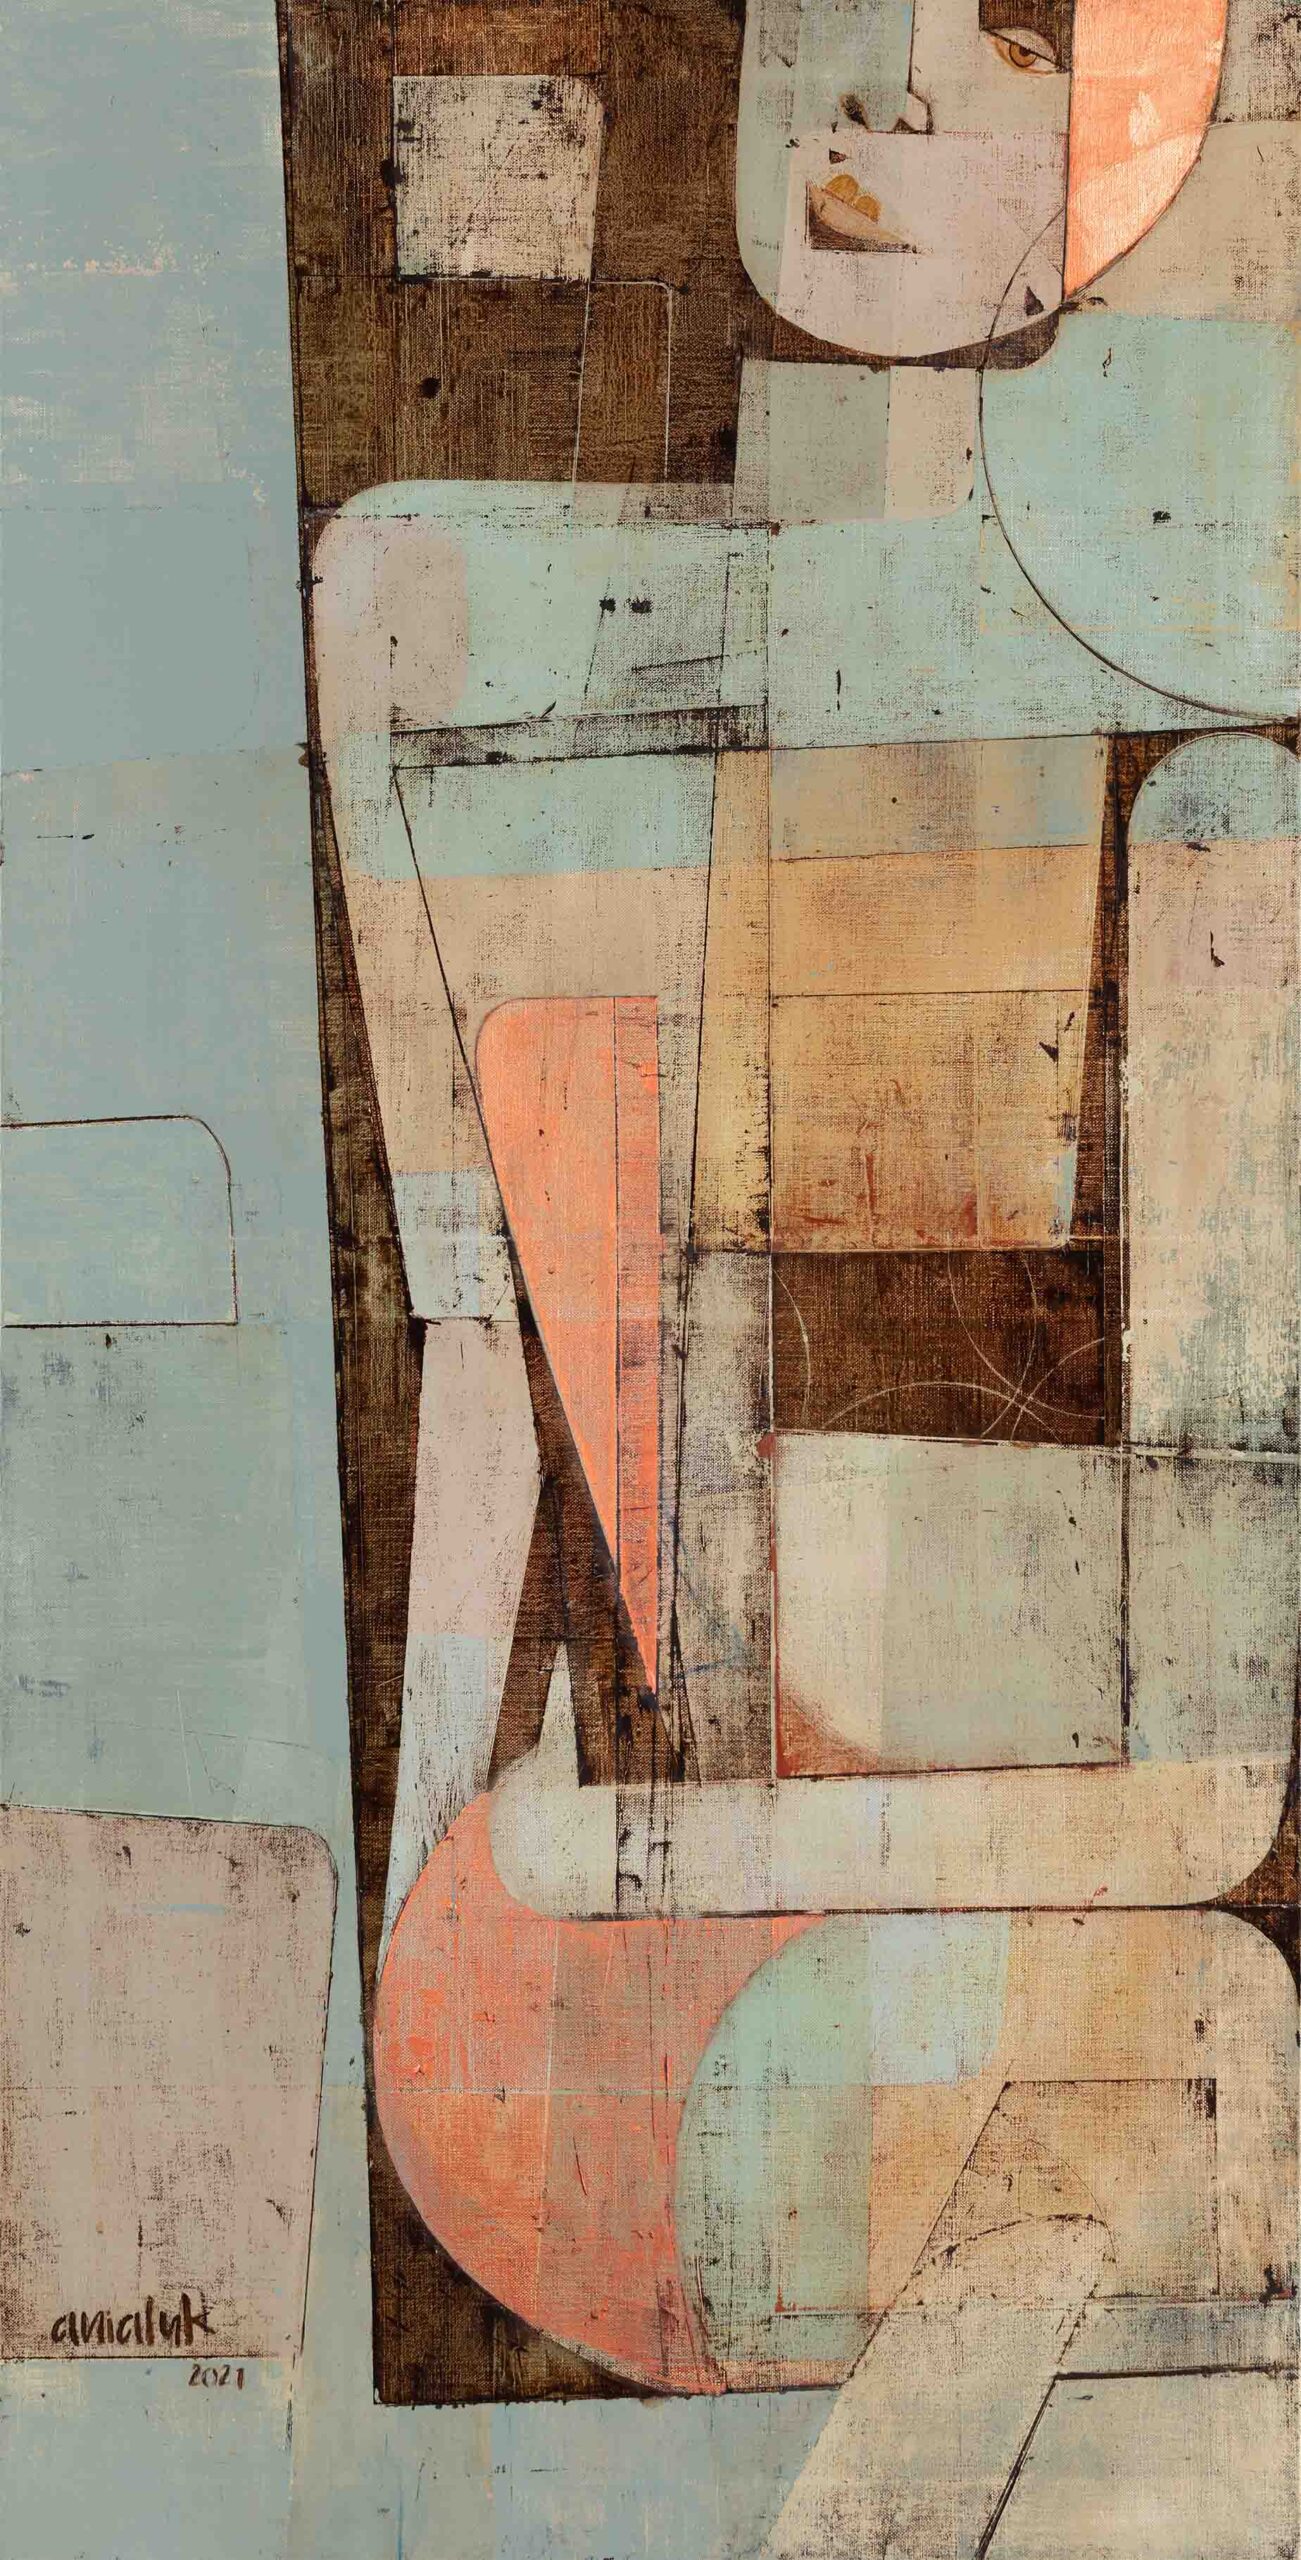 Uncertain art deco abstarct cubist artwork by Ania Luk, geometric abstraction